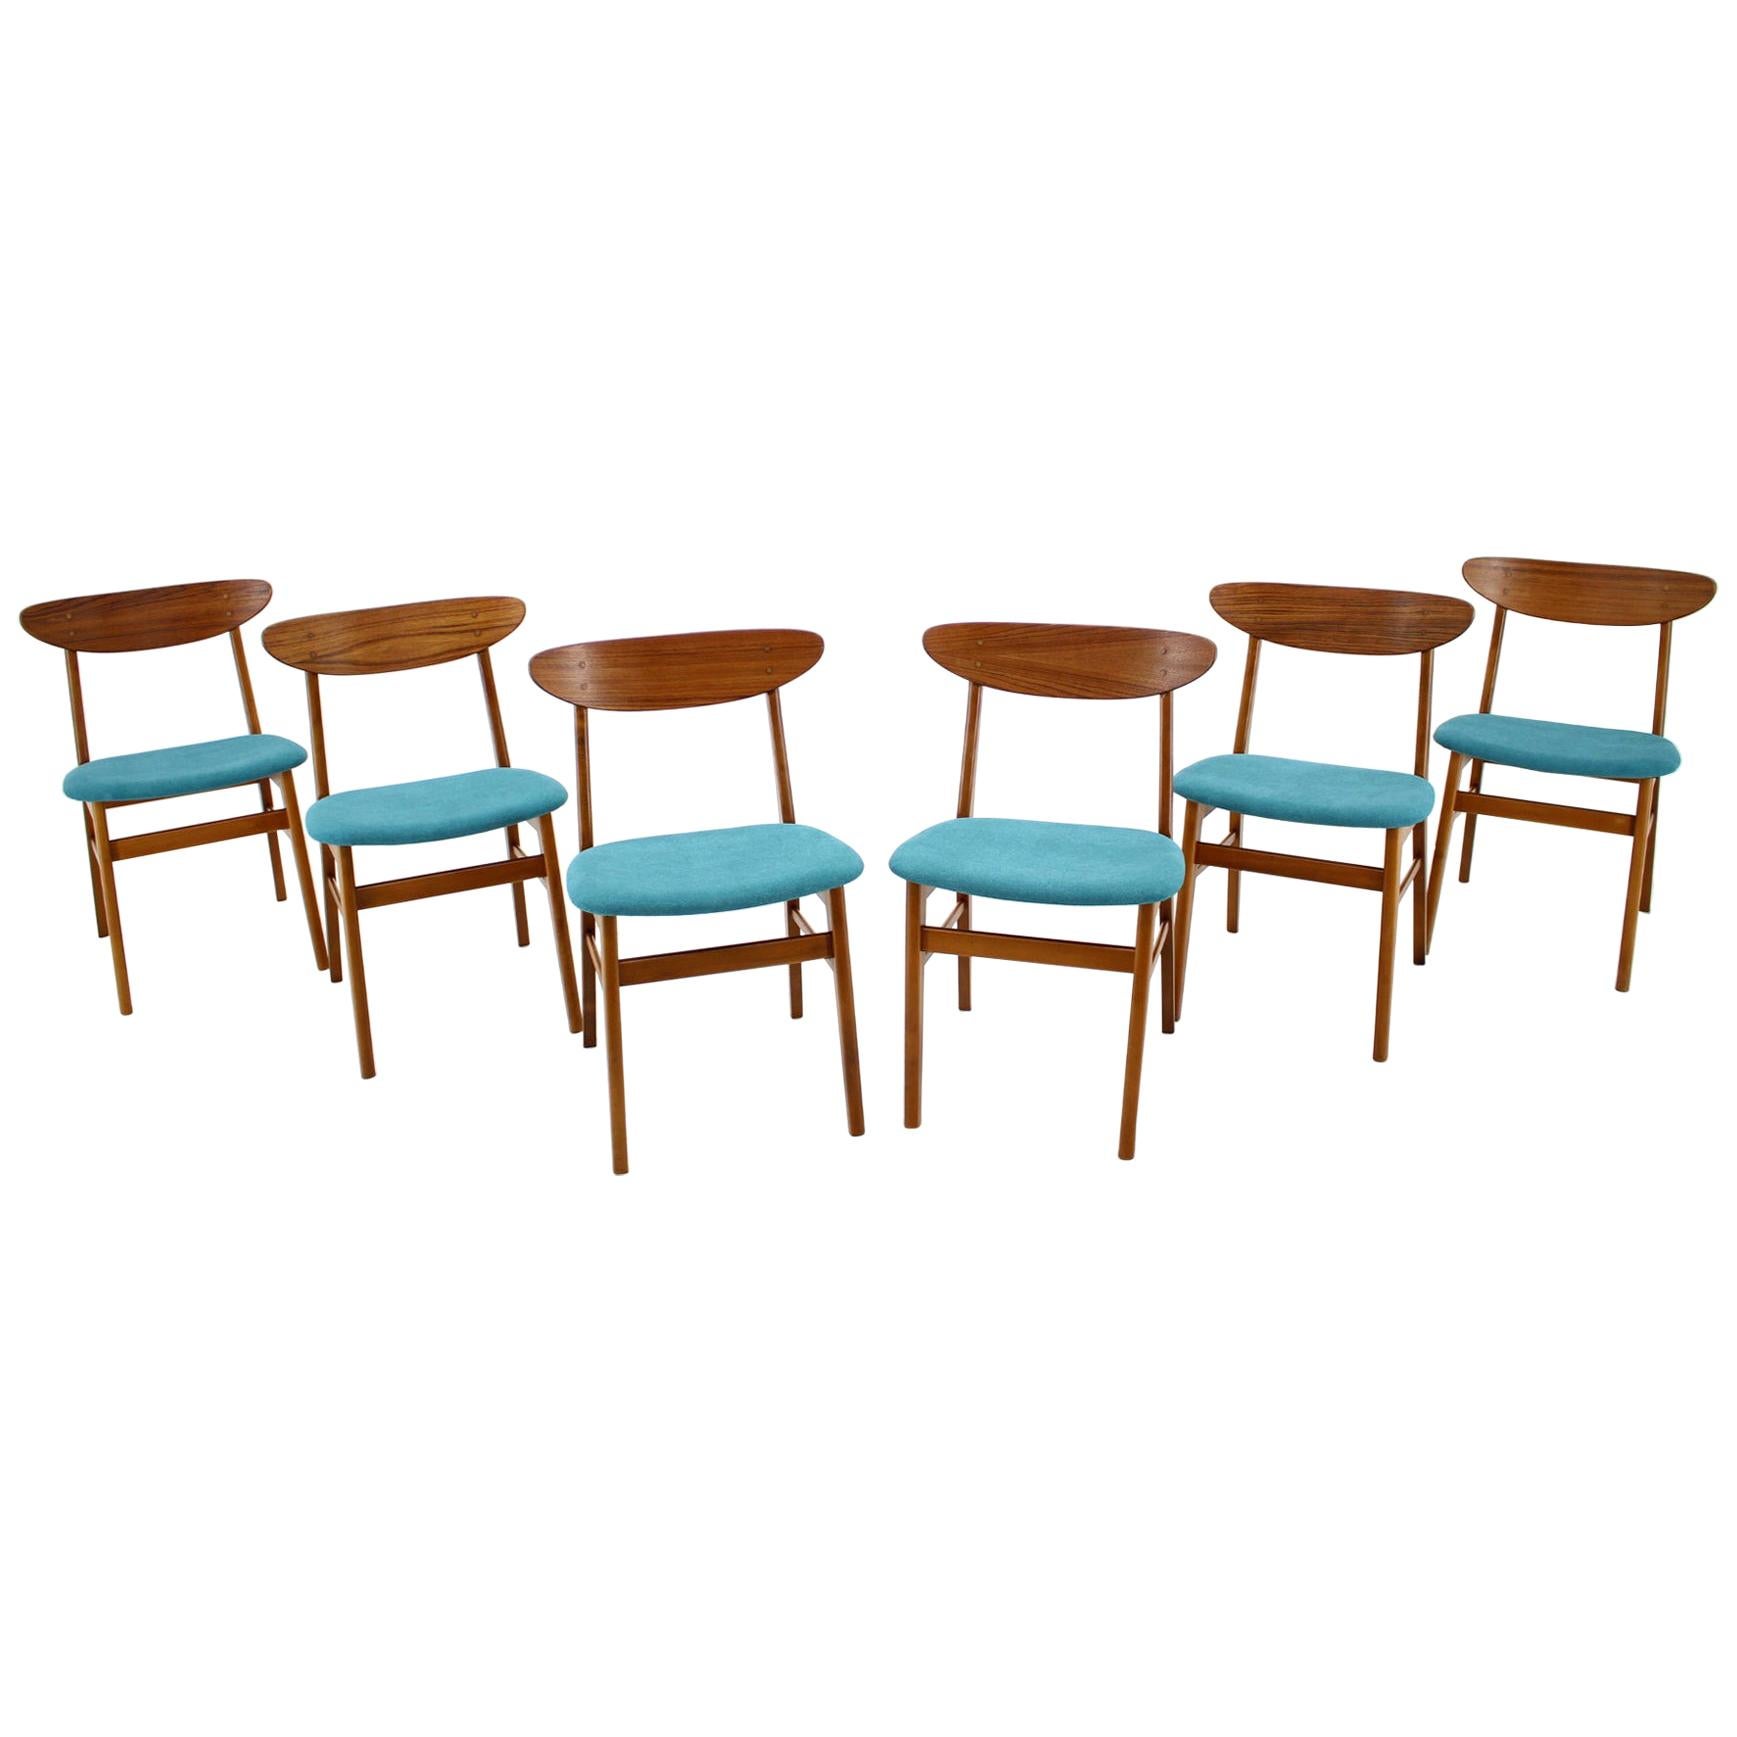 Set of Six Dining Chairs Model 210r, Designed by Thomas Harlev, Denmark